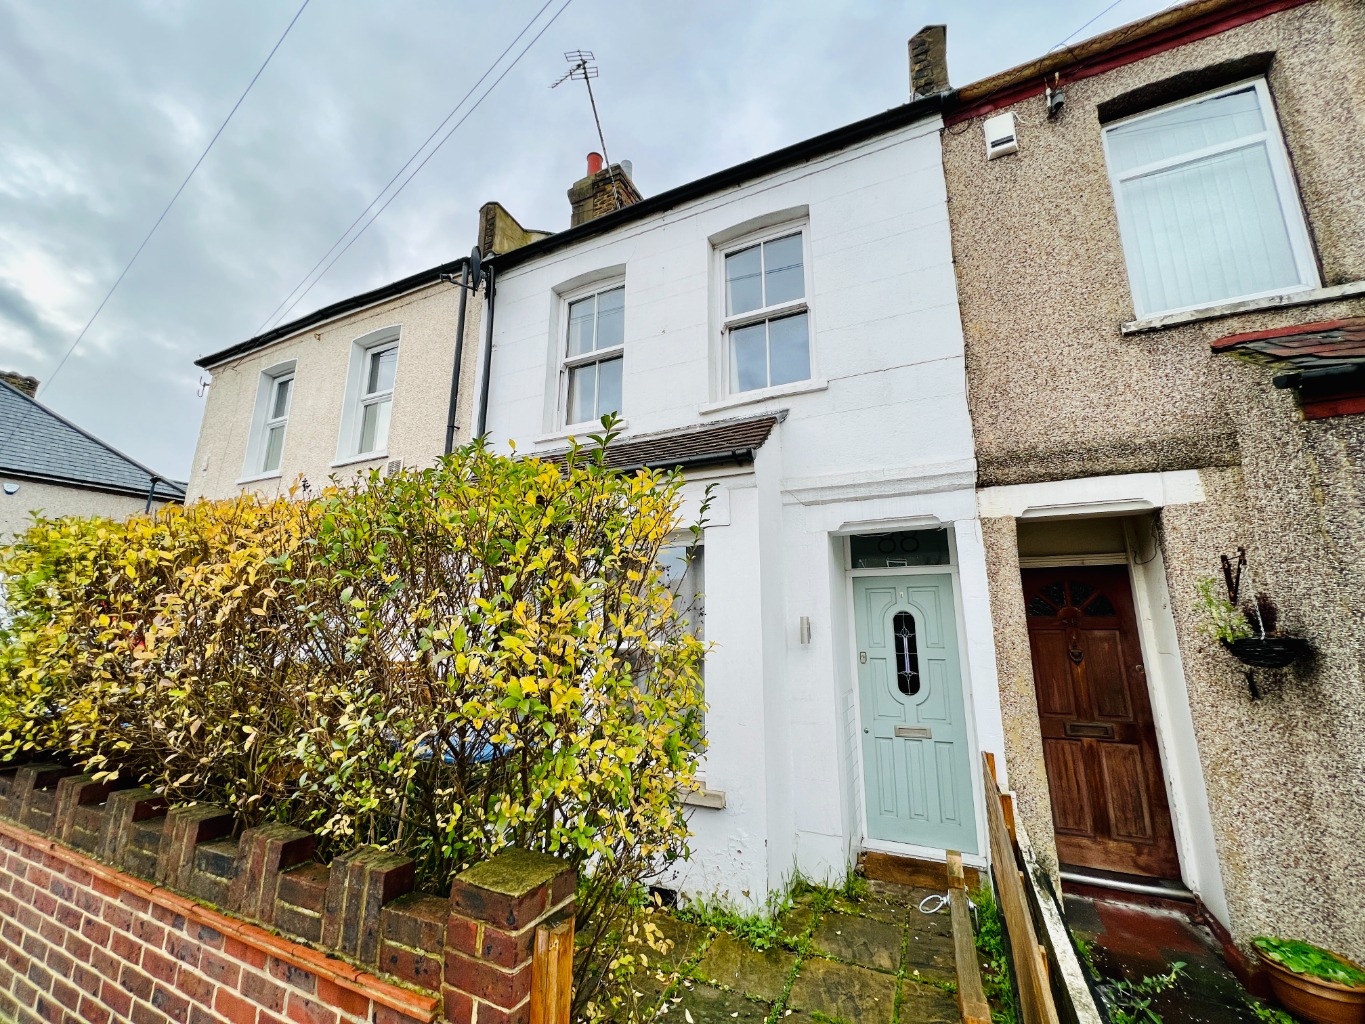 2 bed terraced house for sale - Property Image 1